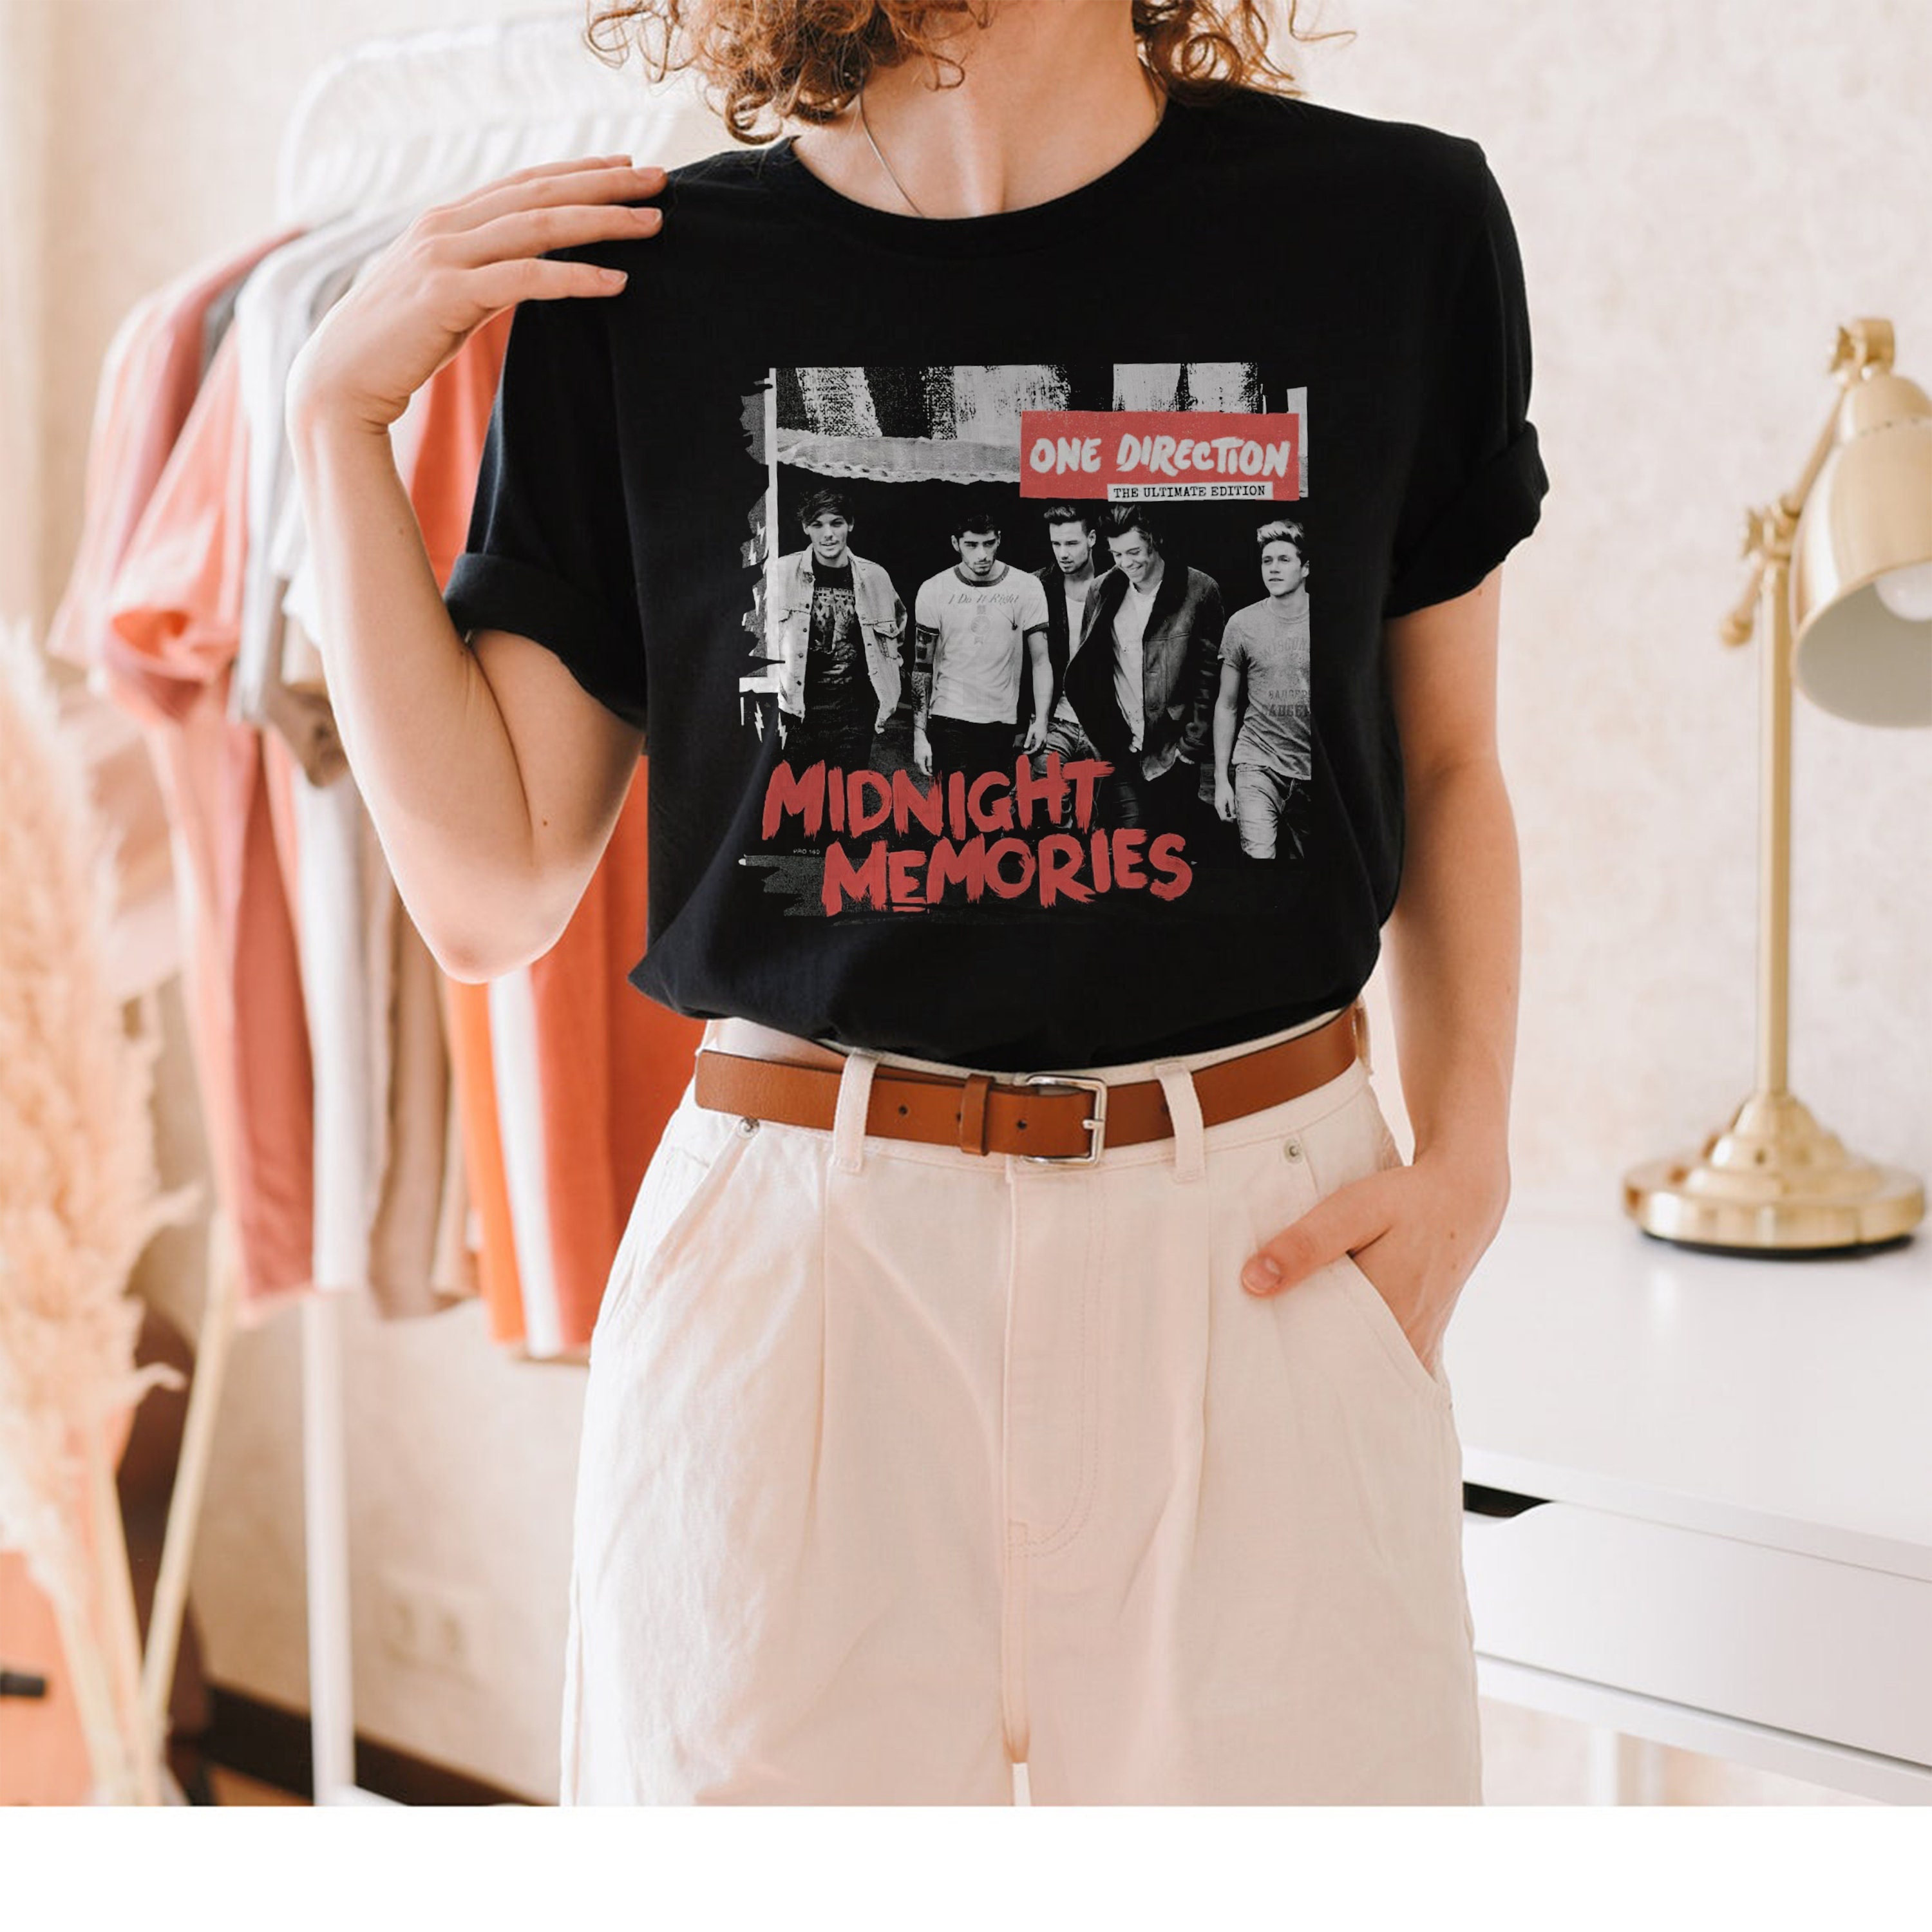 Discover One Direction Midnight Memories Sommer Cooles T-Shirt